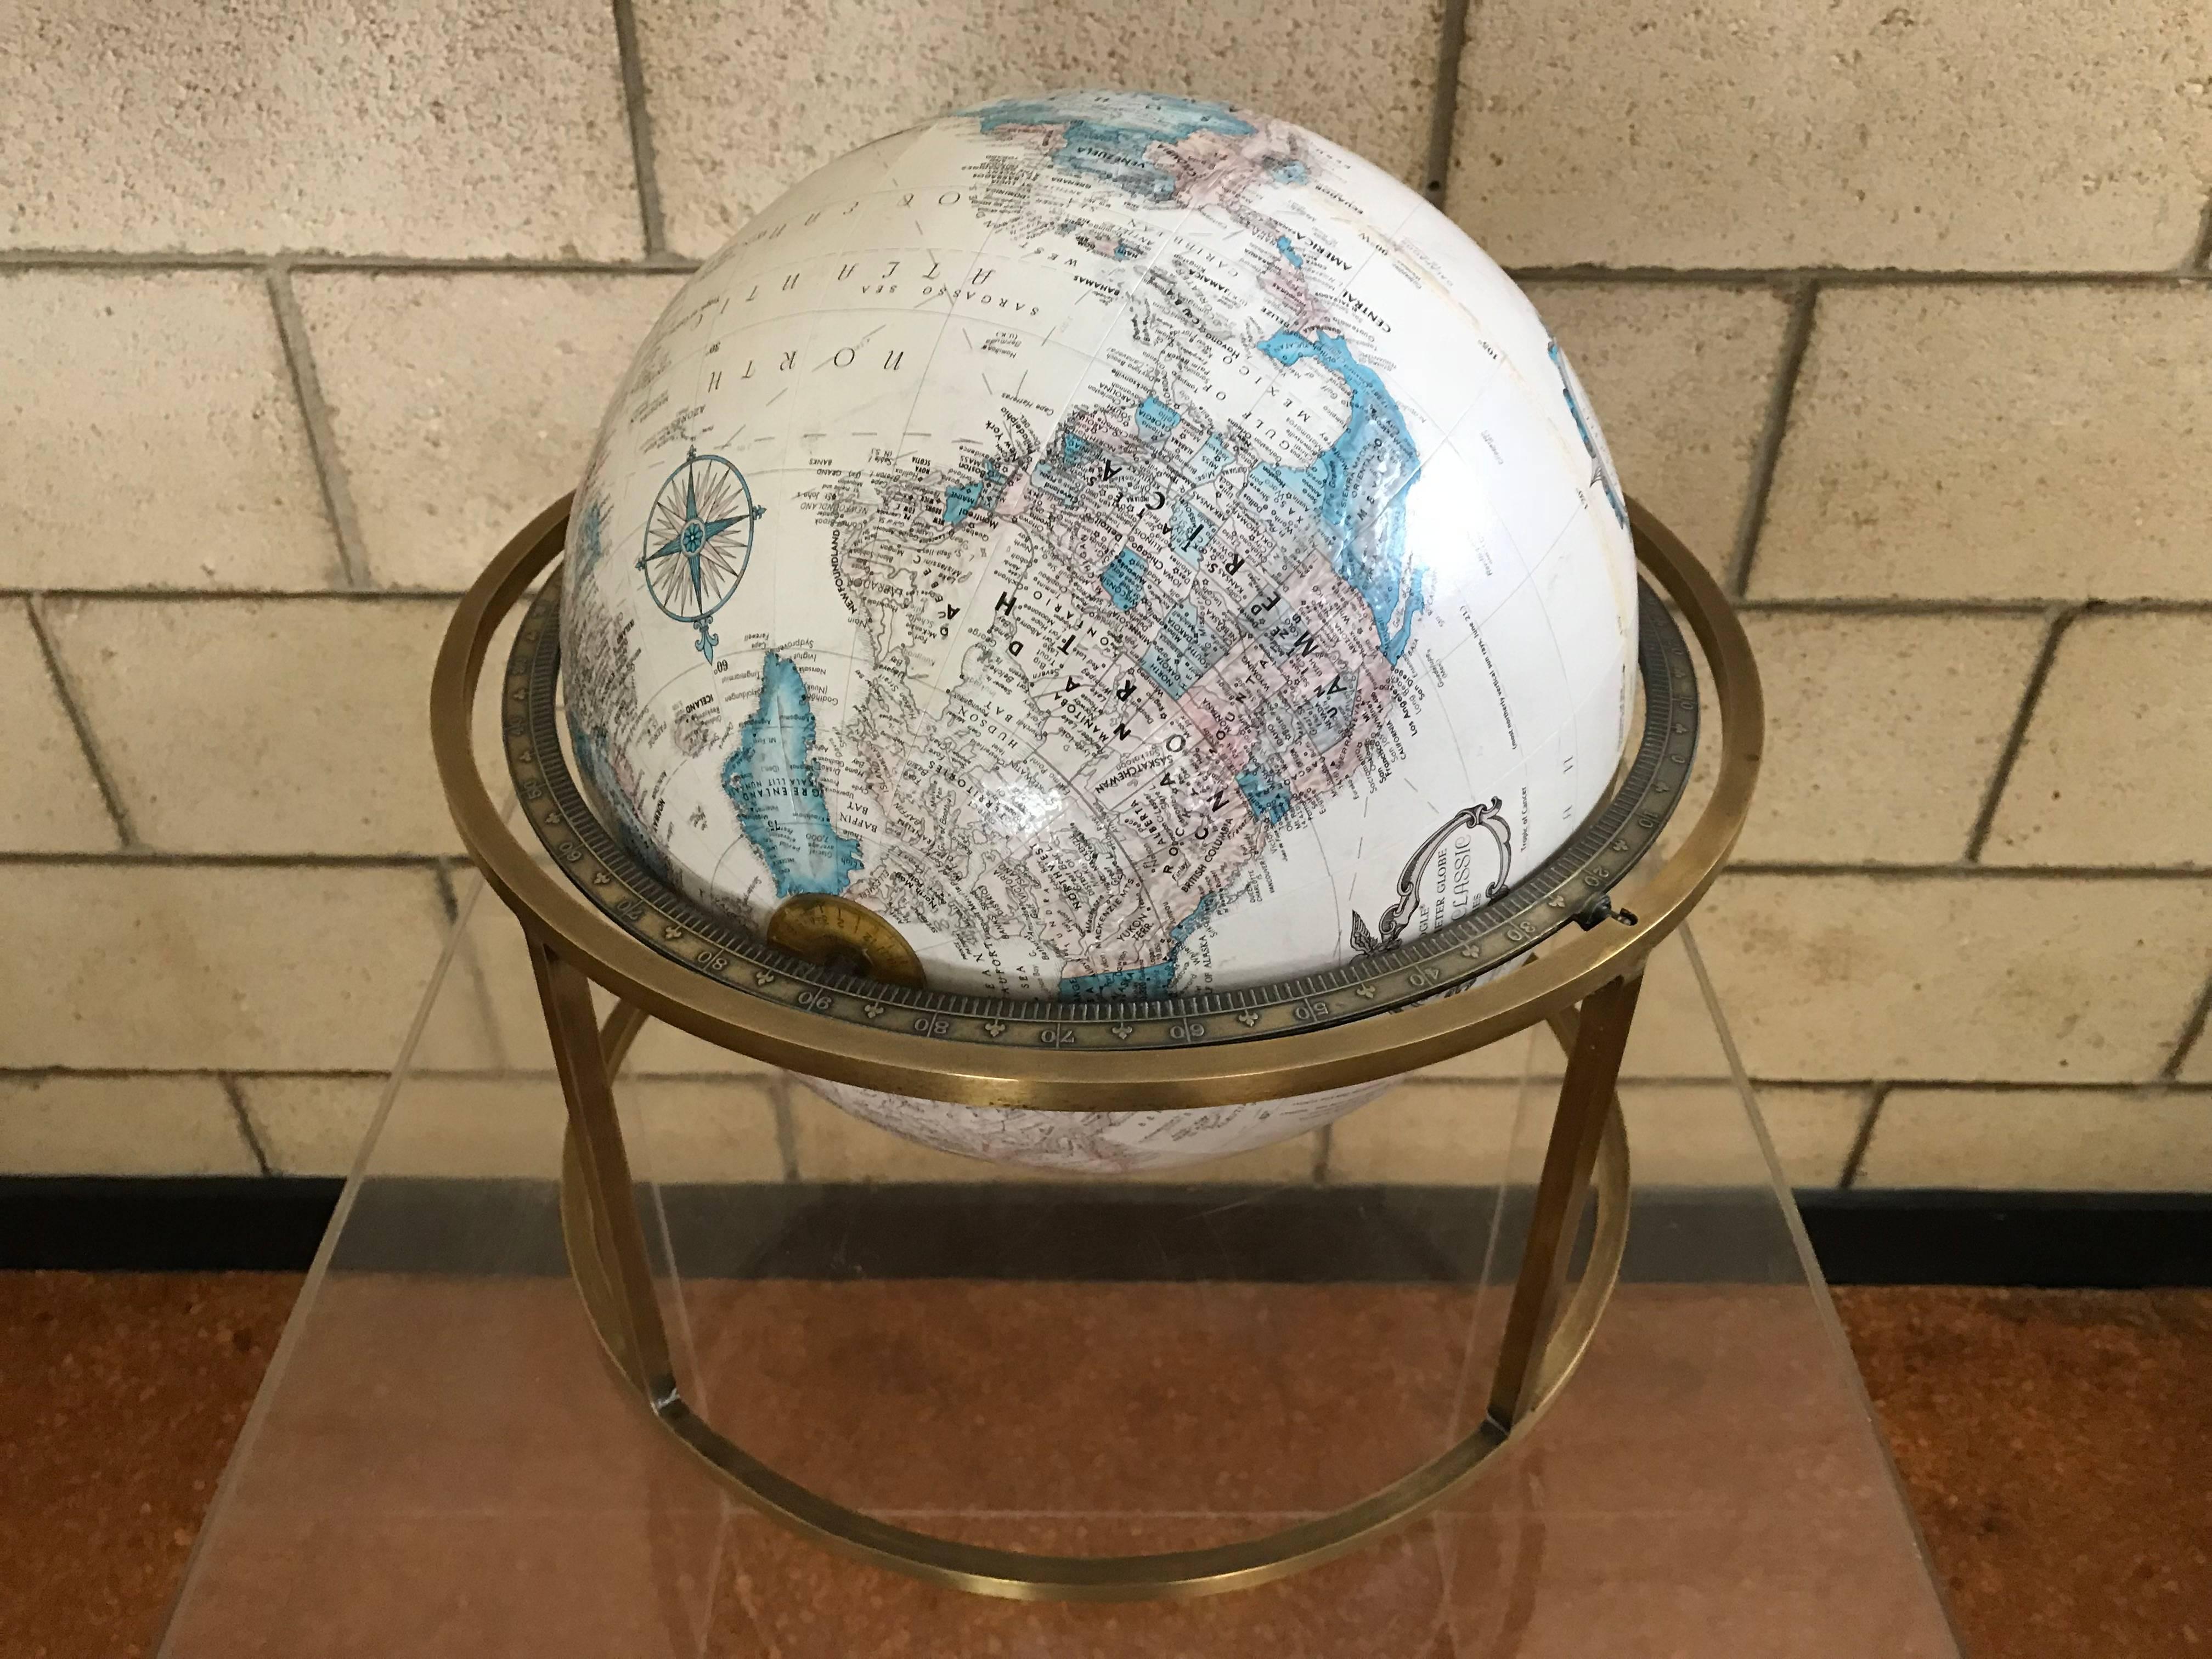 Modernist desk globe in the style of Paul McCobb (McCobb actually never designed globes - but the brass carriage is reminiscent of his furniture designs). this globe dates to 1978. (Solomon Islands no longer British) The brass has been cleaned and